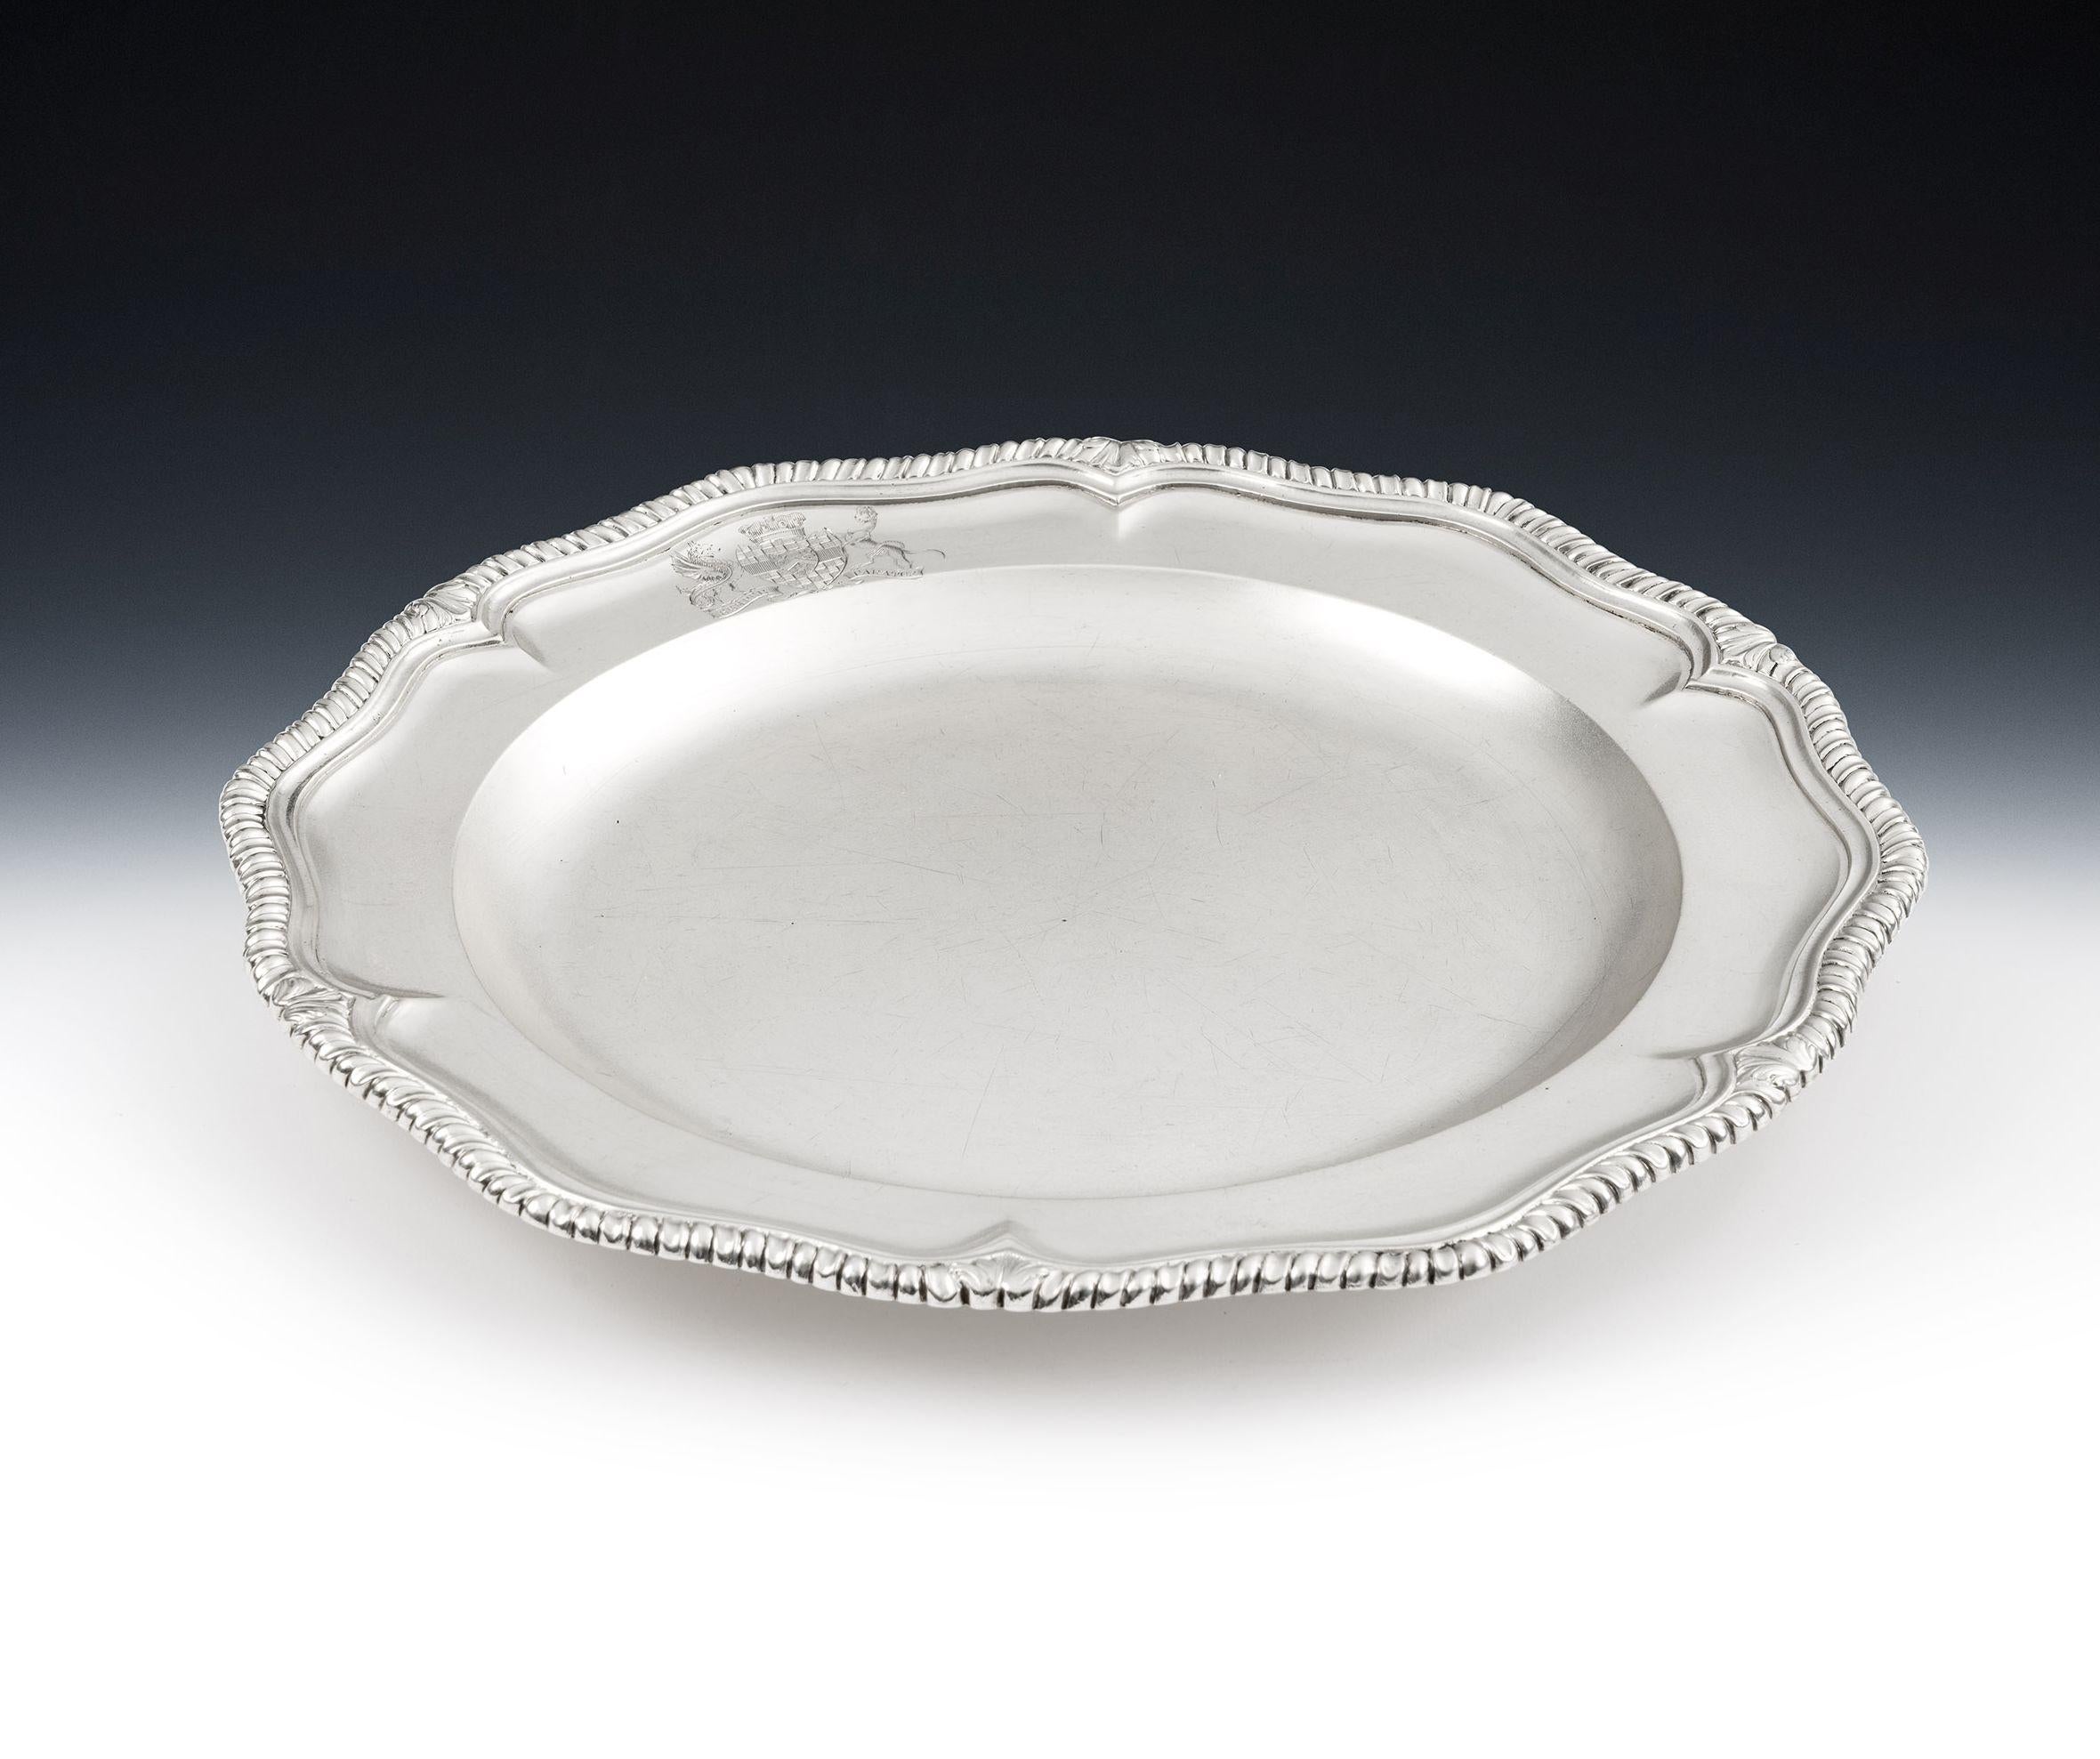 A Very Fine Pair of George II Serving Dishes Made in London in 1745 by Edward Aldridge.

The Dishes are shaped circular in form, with a stepped gadrooned border, interspersed with foliate motifs.  The reverse is engraved with their number in the